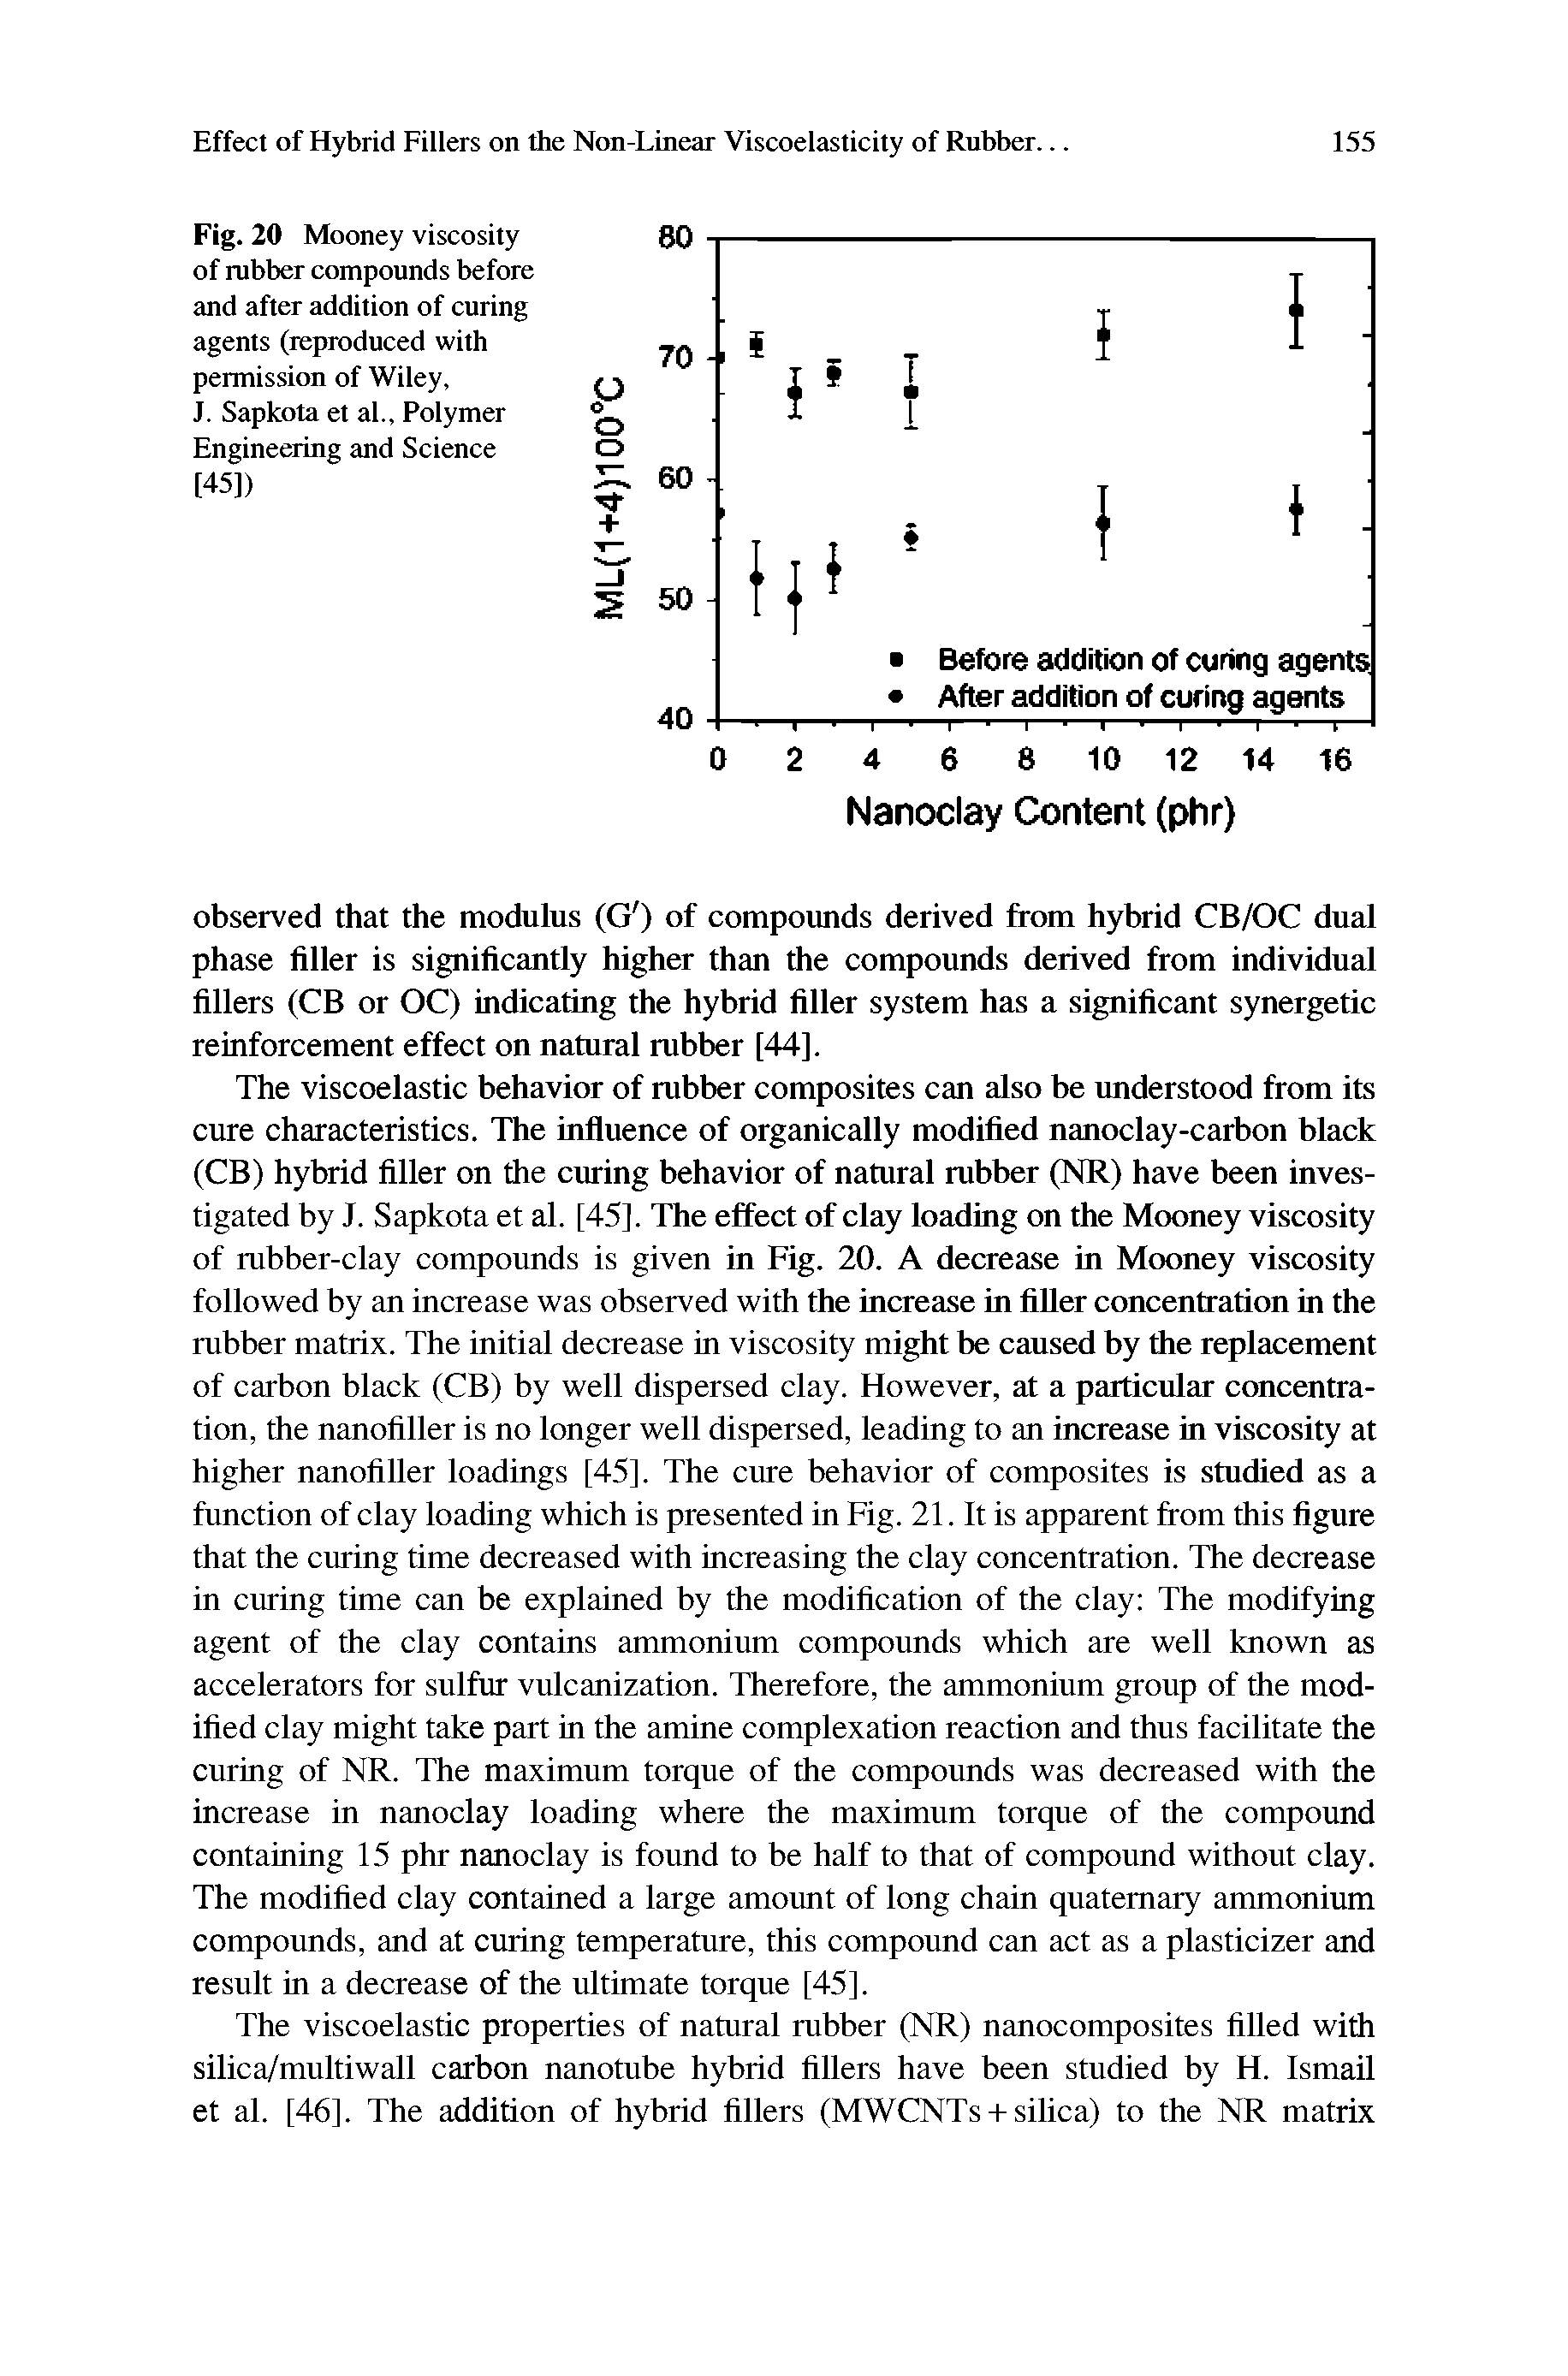 Fig. 20 Mooney viscosity of rubber compounds before and after addition of curing agents (reproduced with permission of Wiley,...